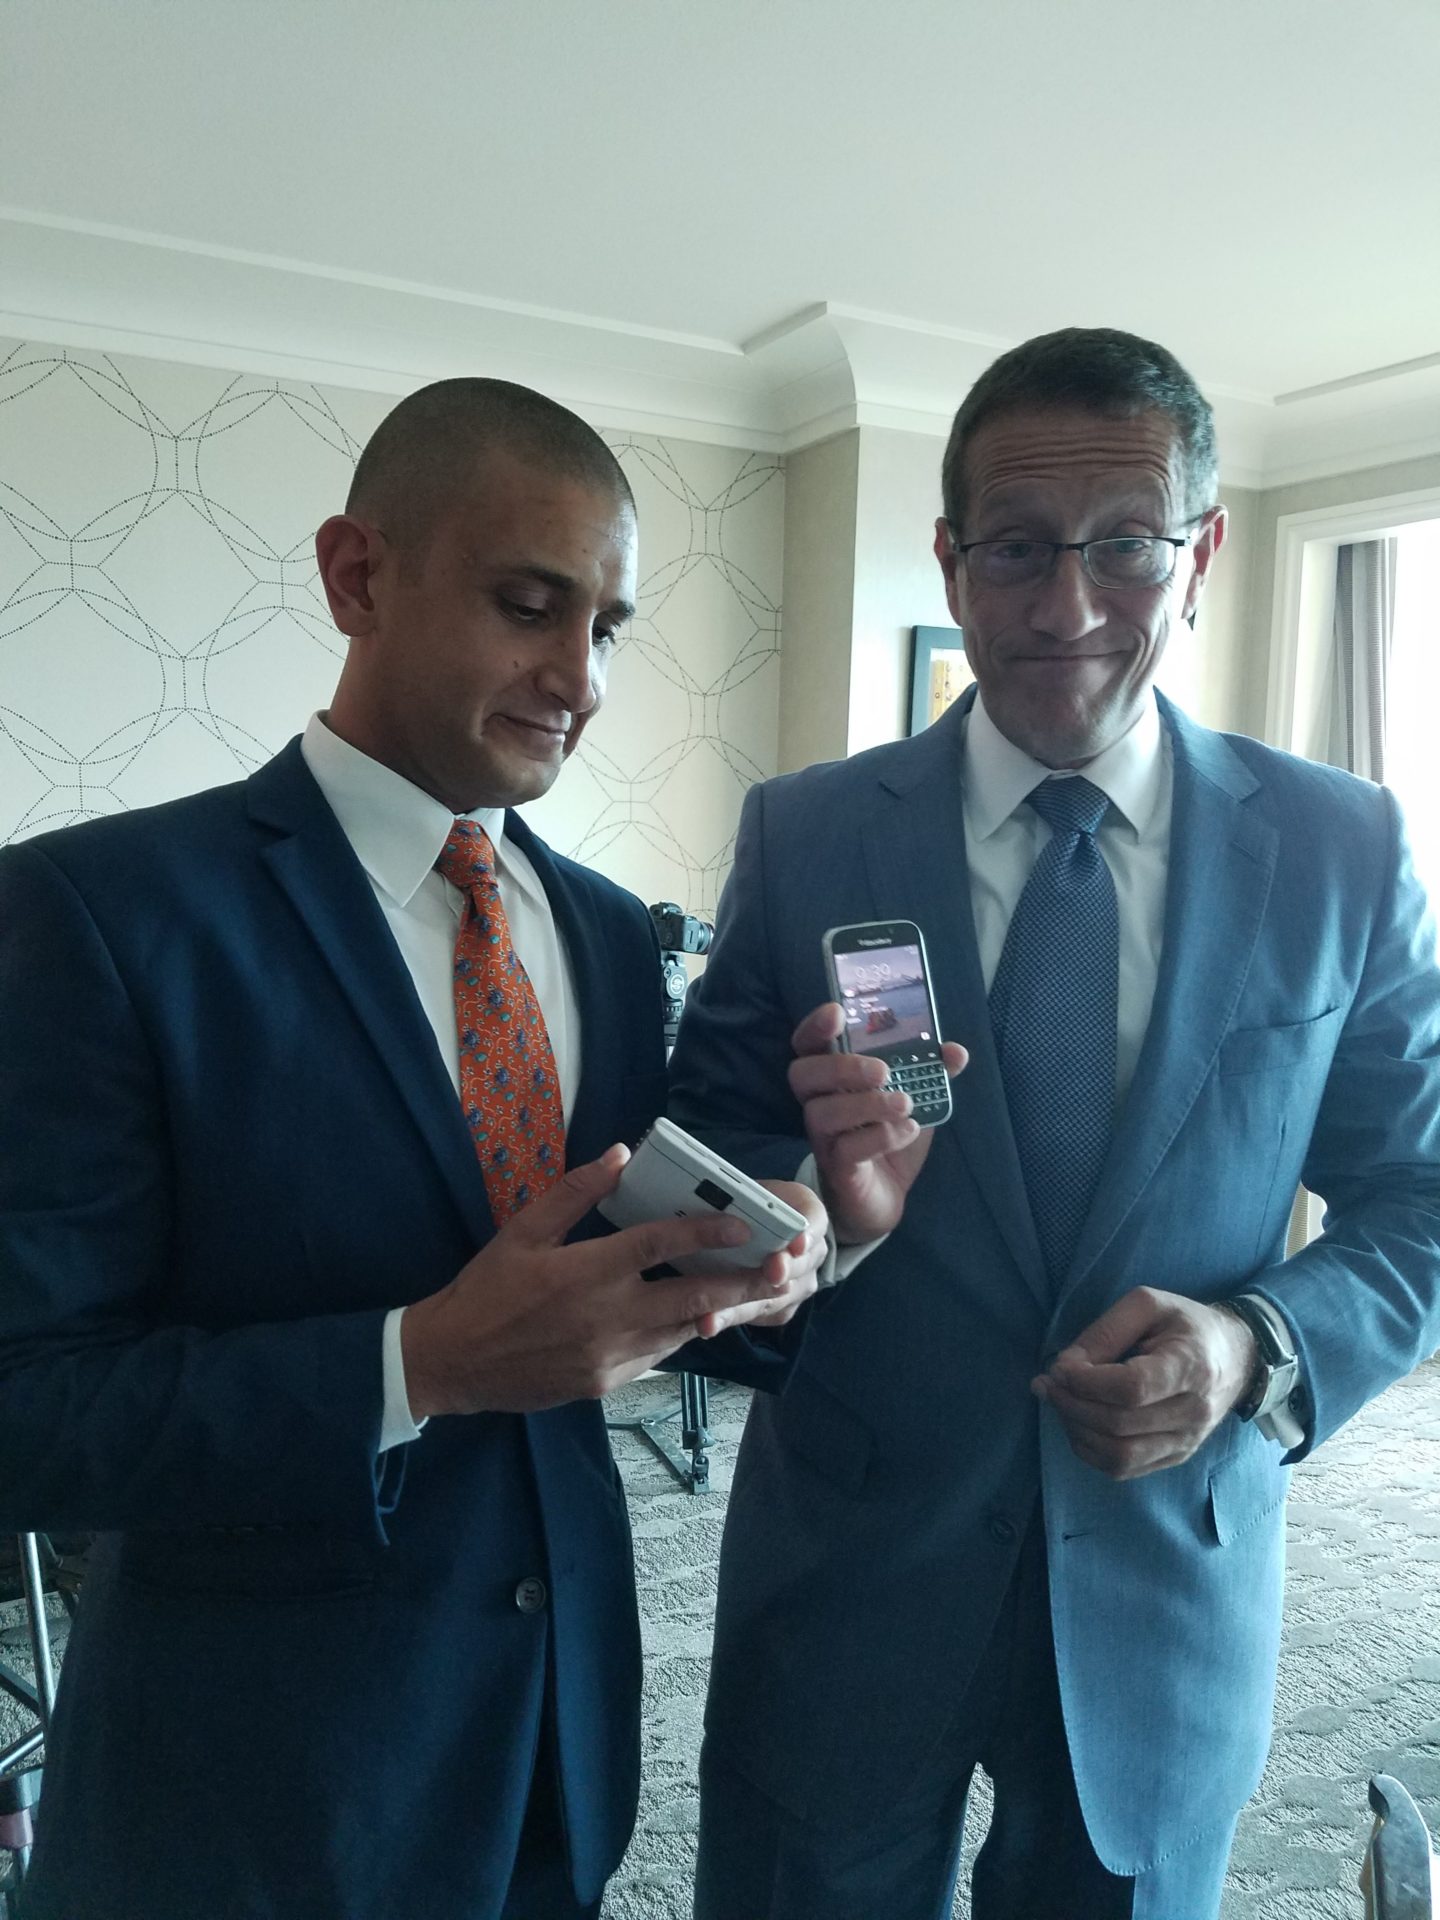 two men in suits holding a phone and a game controller